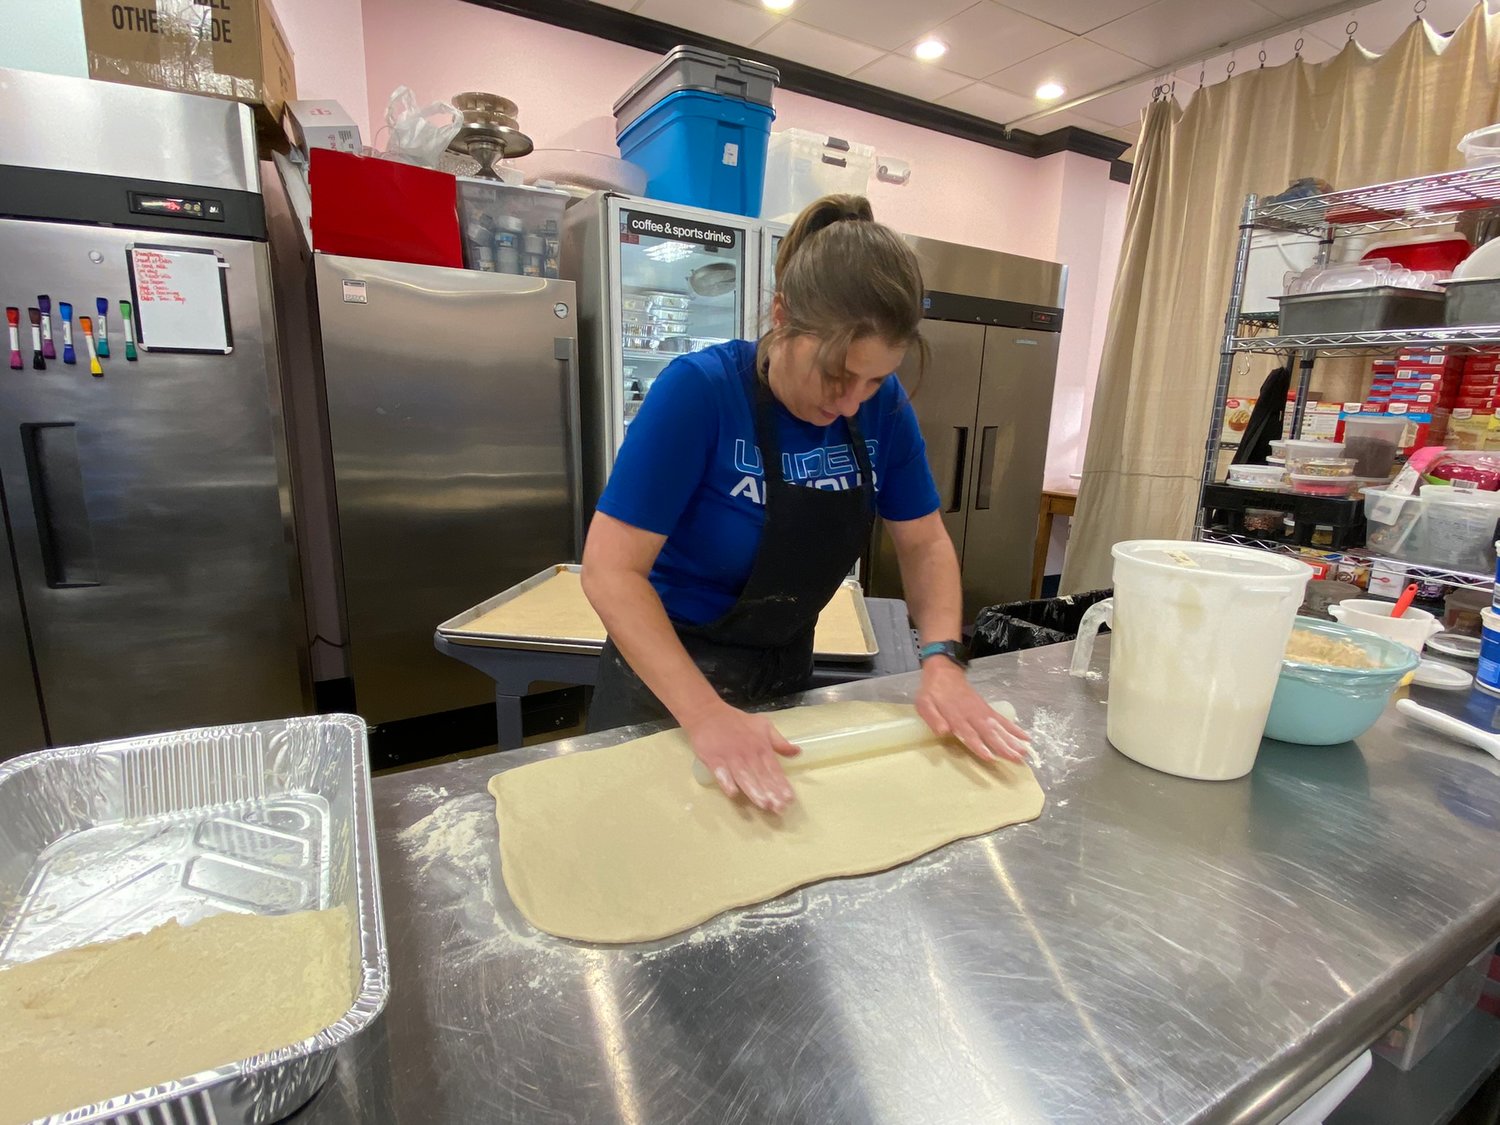 Sylkatis rolls out the dough for the King Cake. The dough is used for the savory King Cake is the same dough used for the sweet King Cake, cinnamon rolls, dinner rolls, and bread loaves.